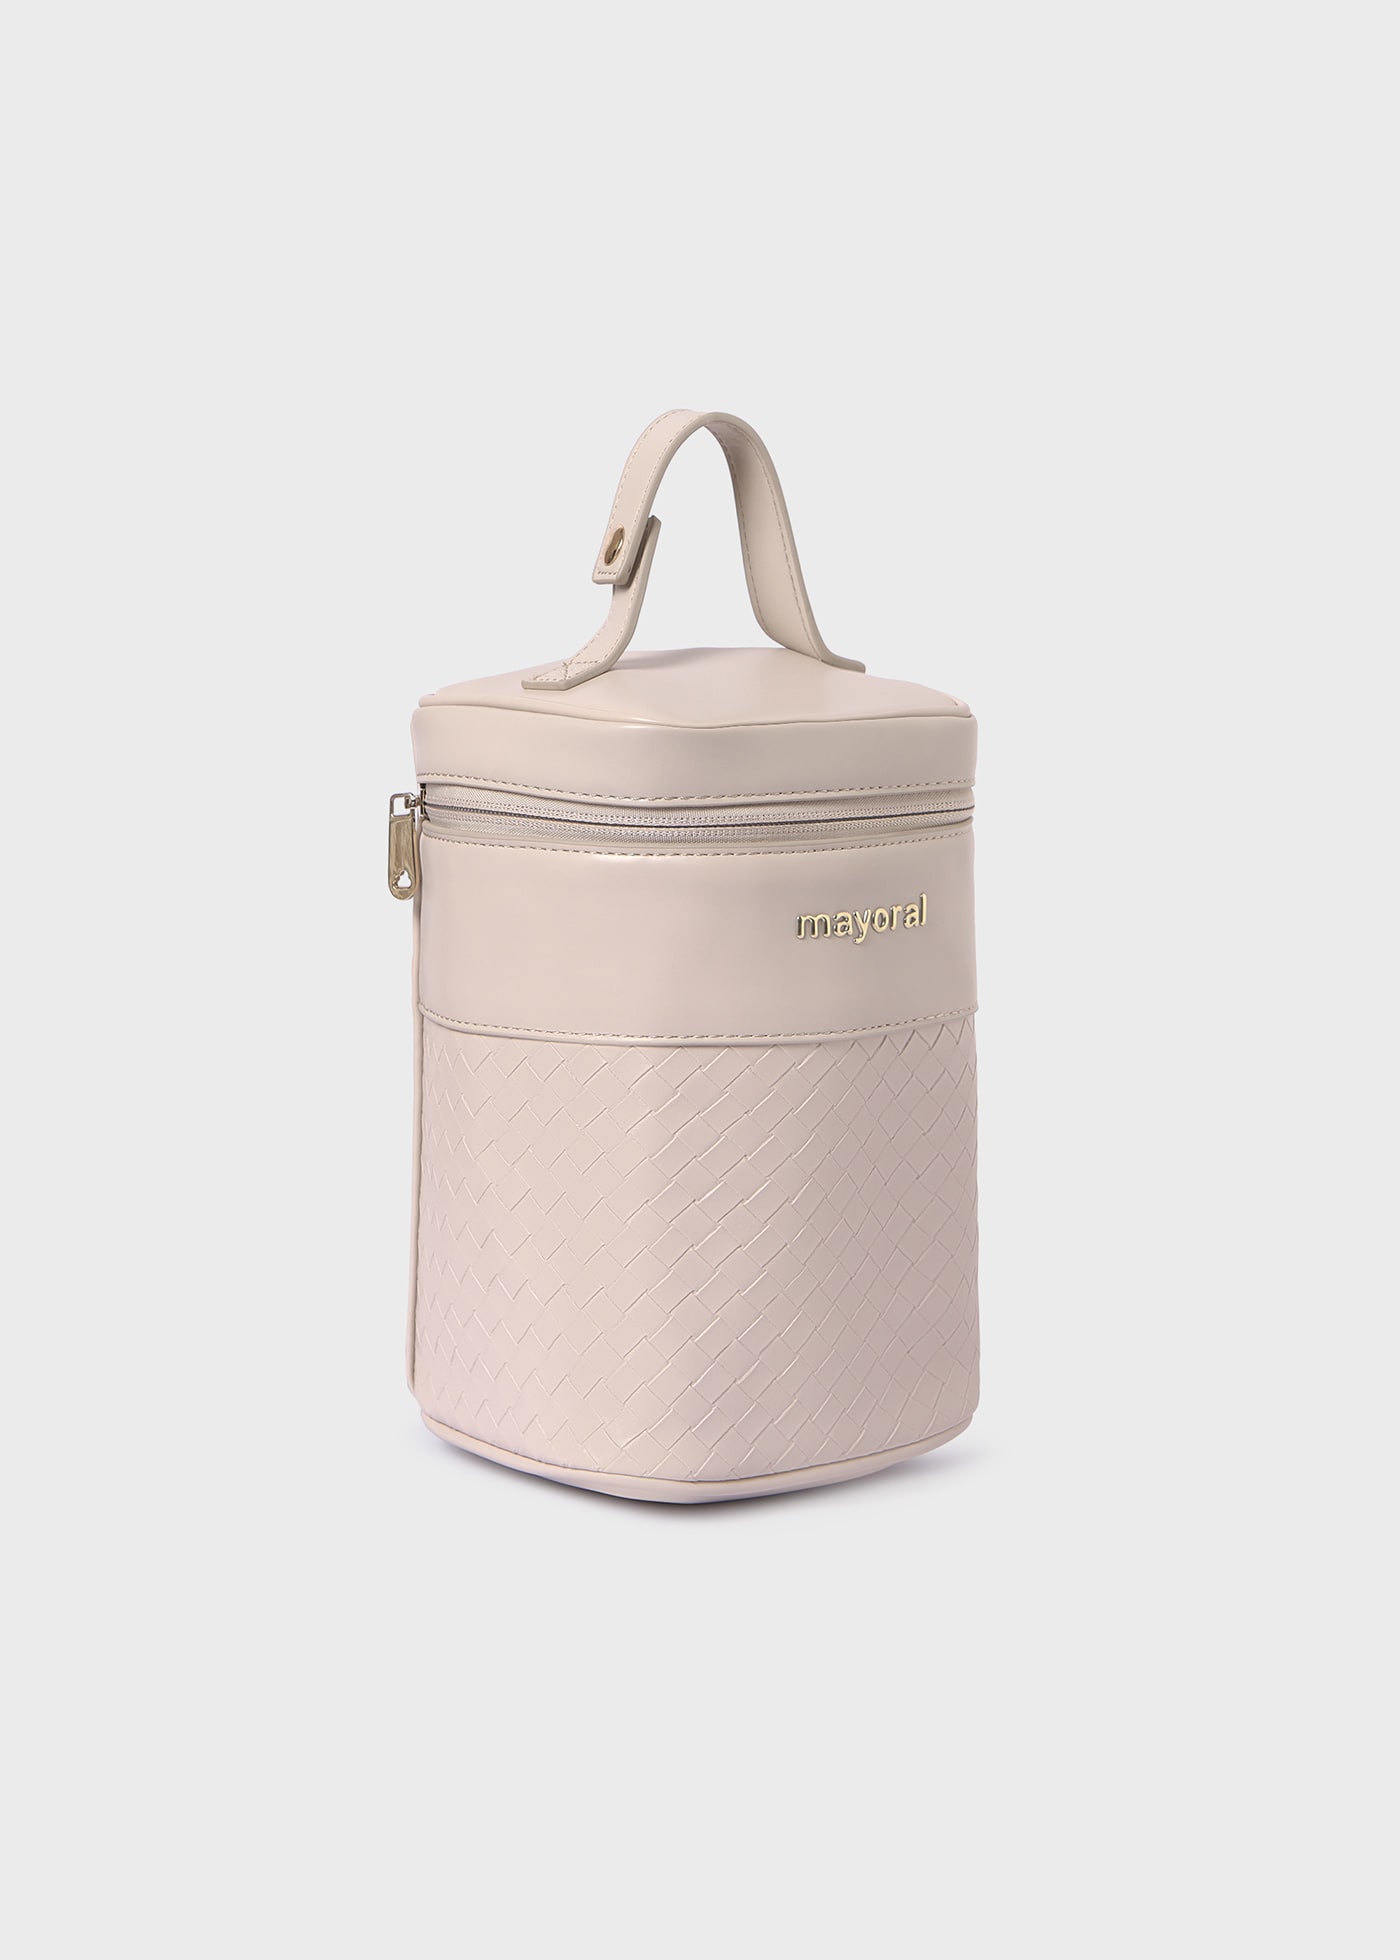 Baby Insulated Bag